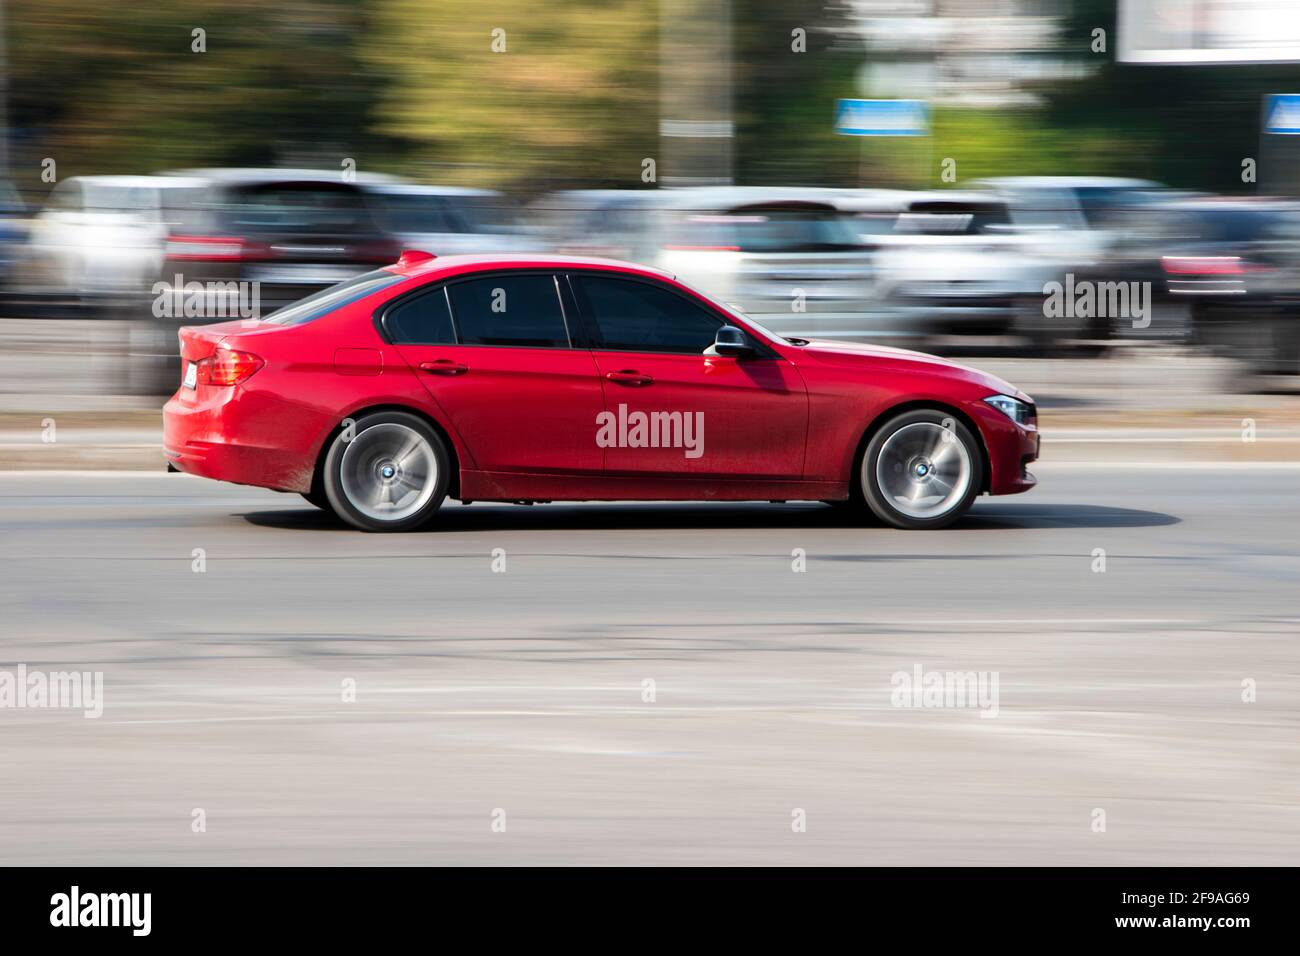 Ukraine, Kyiv - 1 October 2020: Red BMW 3 Series car moving on the street Stock Photo